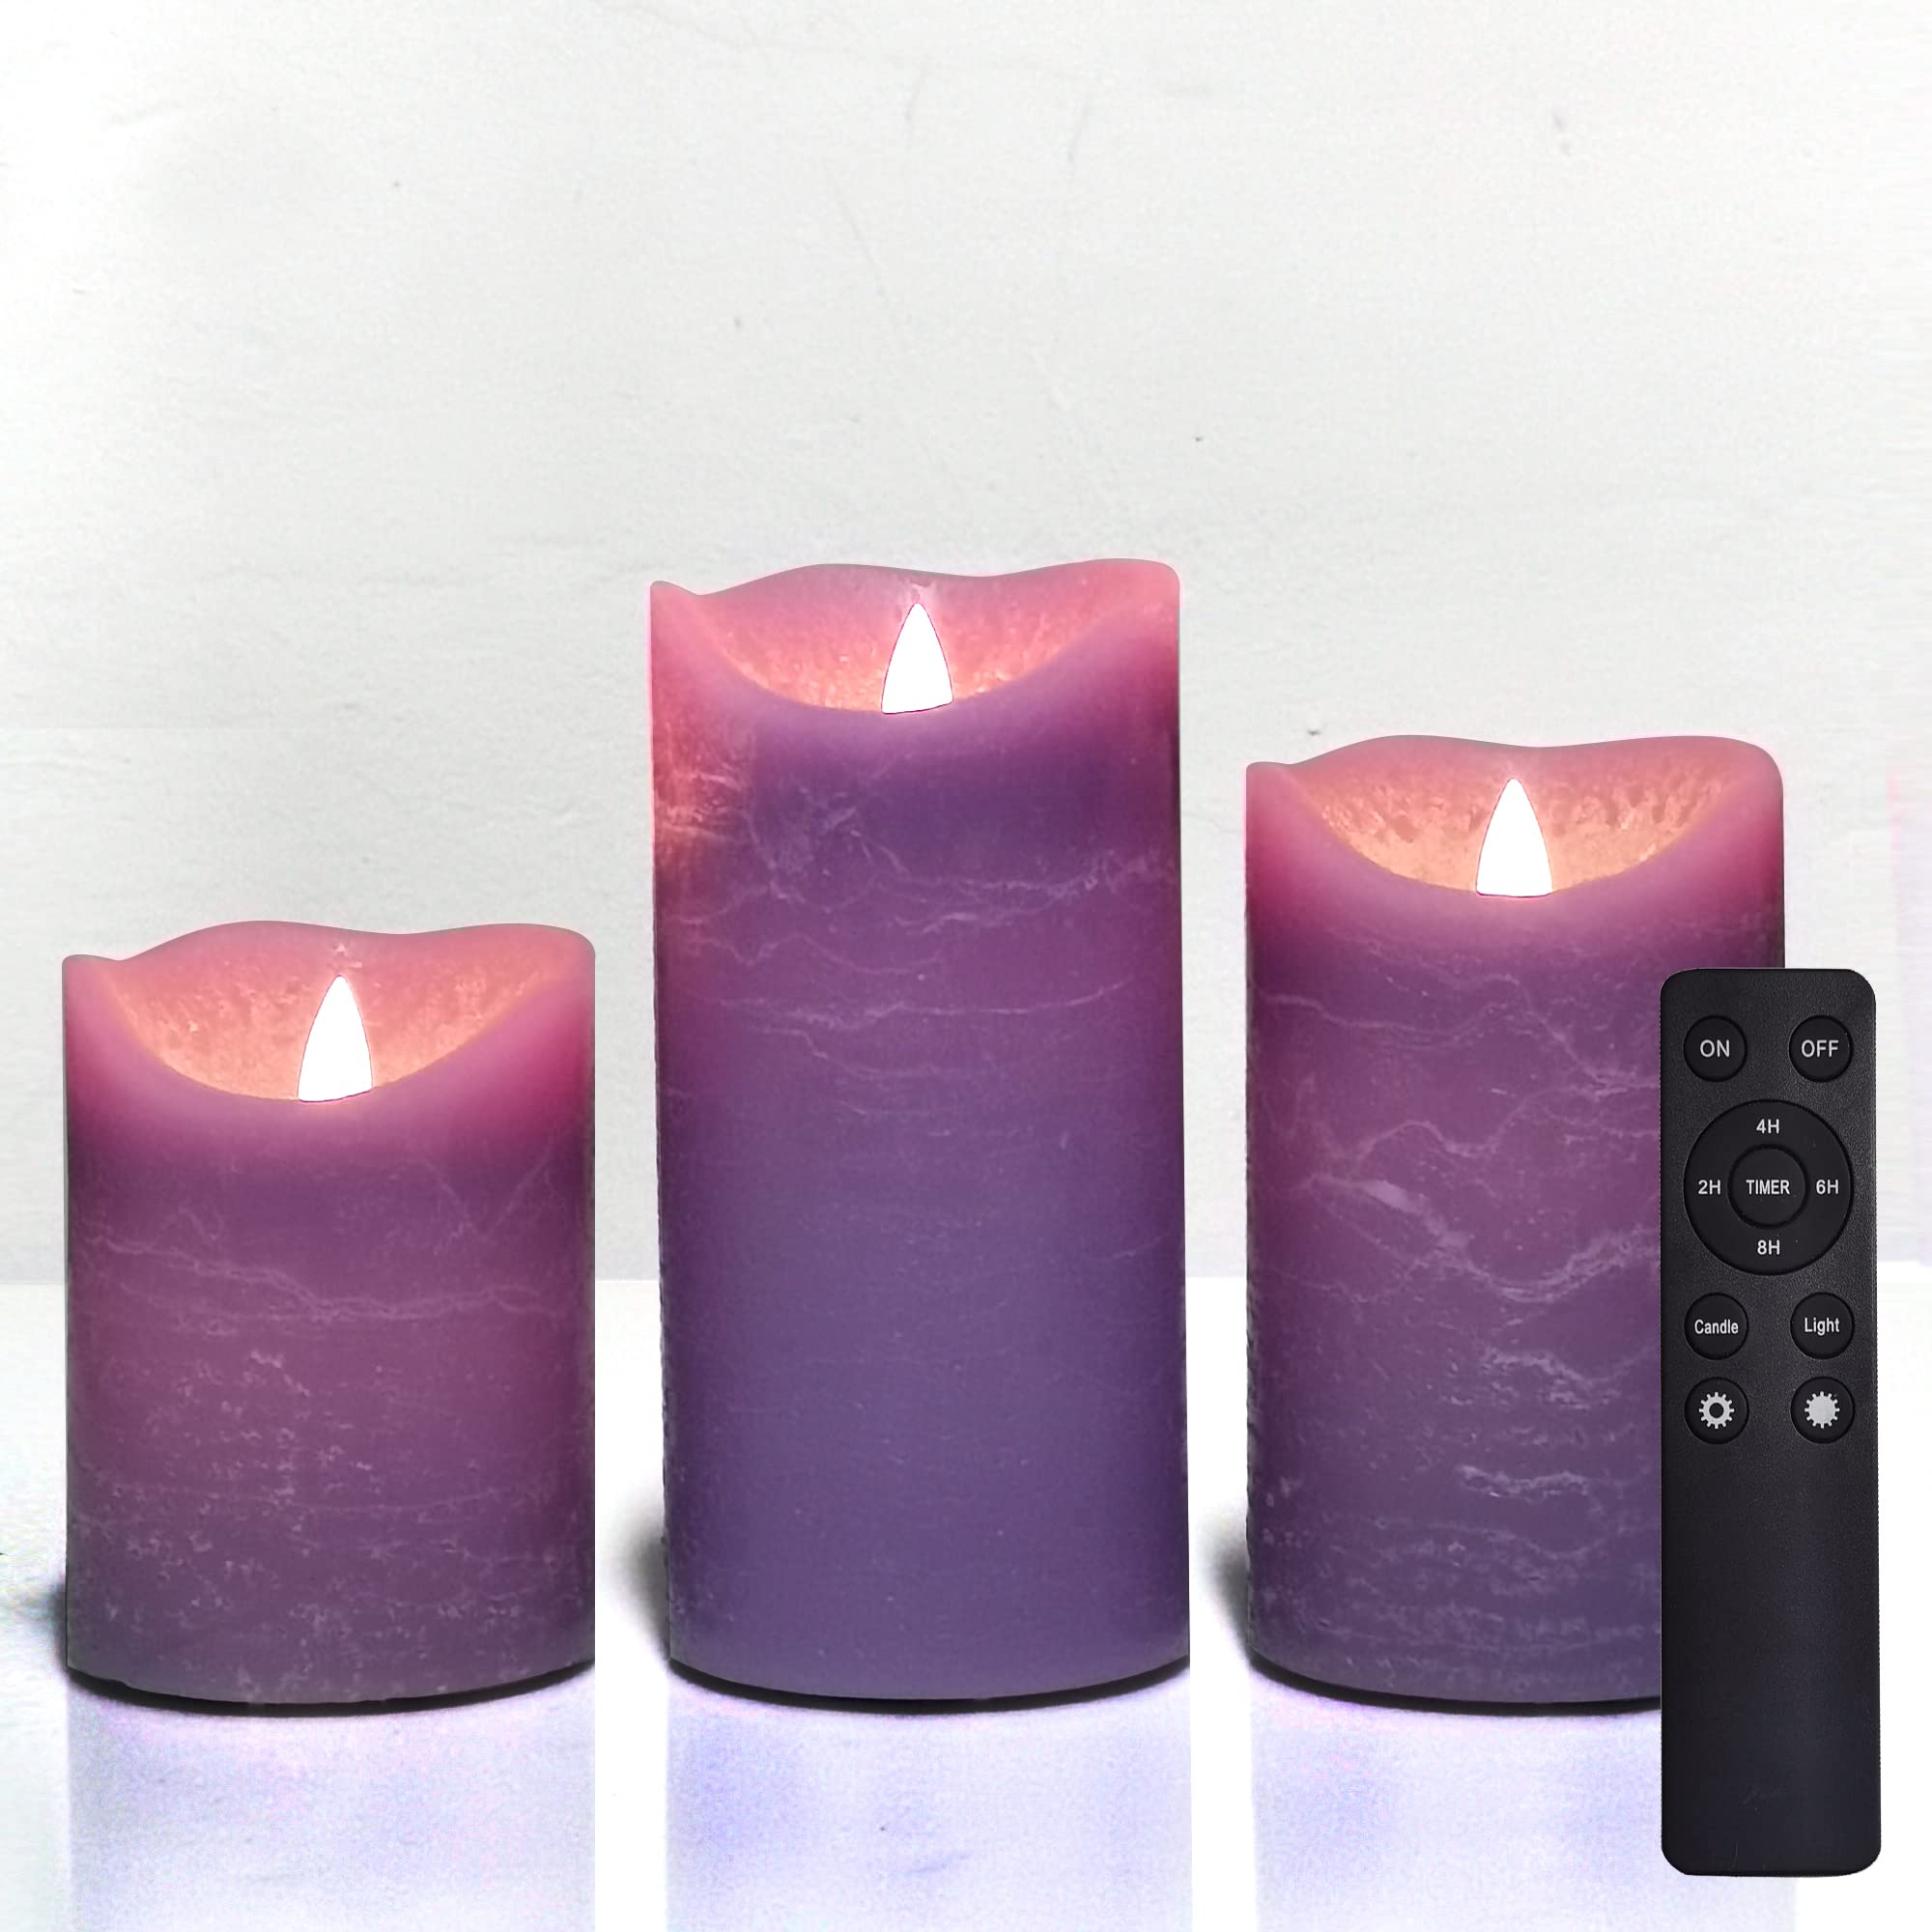 Battery Operated LED Flameless Pillar Candles with Timer and Remote Flickering Electric Bright Real Wax Candles for Home Decor Wedding Birthday Party Decorations, 3Pack D 3" x H 4"5"6"(Purple)